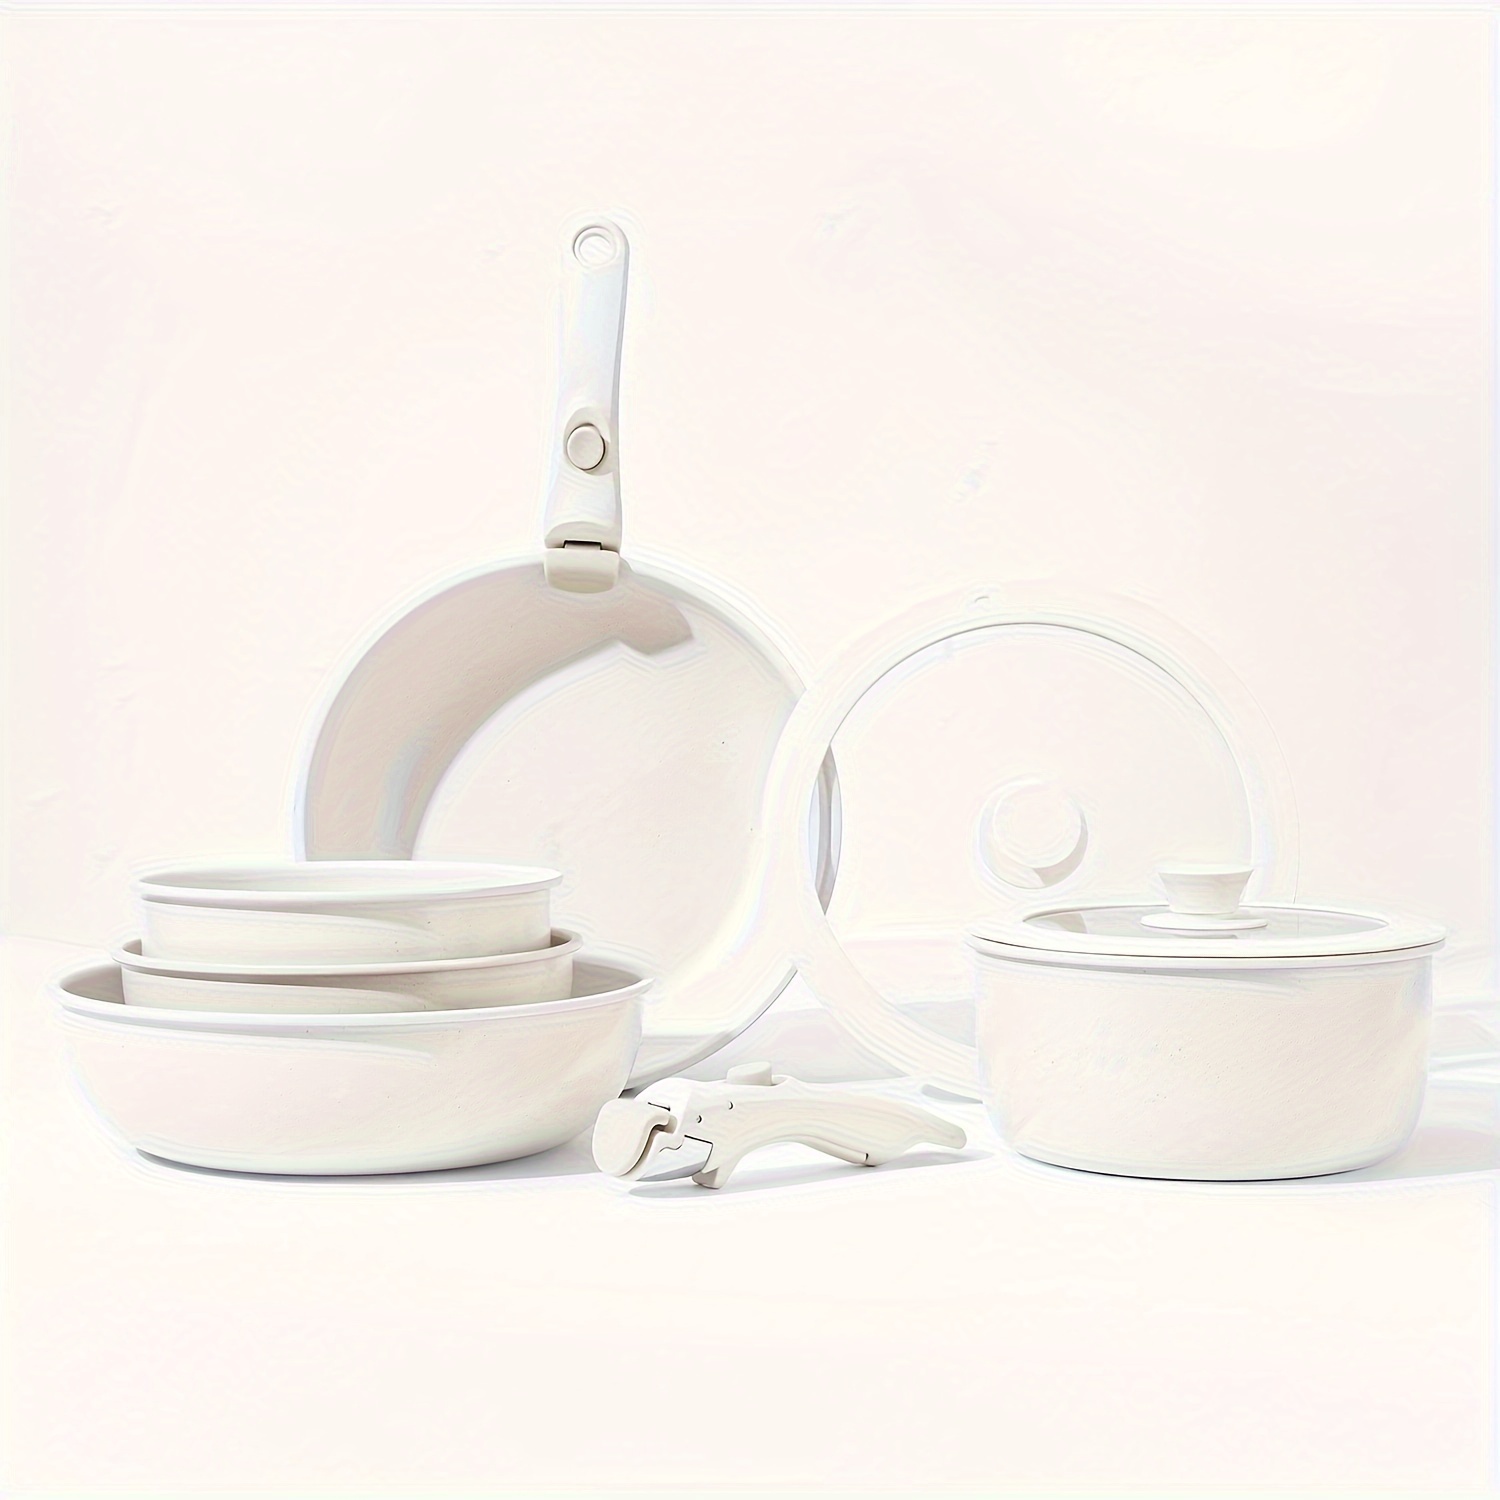 

Chic Non-stick Cookware Set With Detachable Handles - Includes Frying Pan, Soup Pot, Skillet & Nesting Pots For Easy Storage